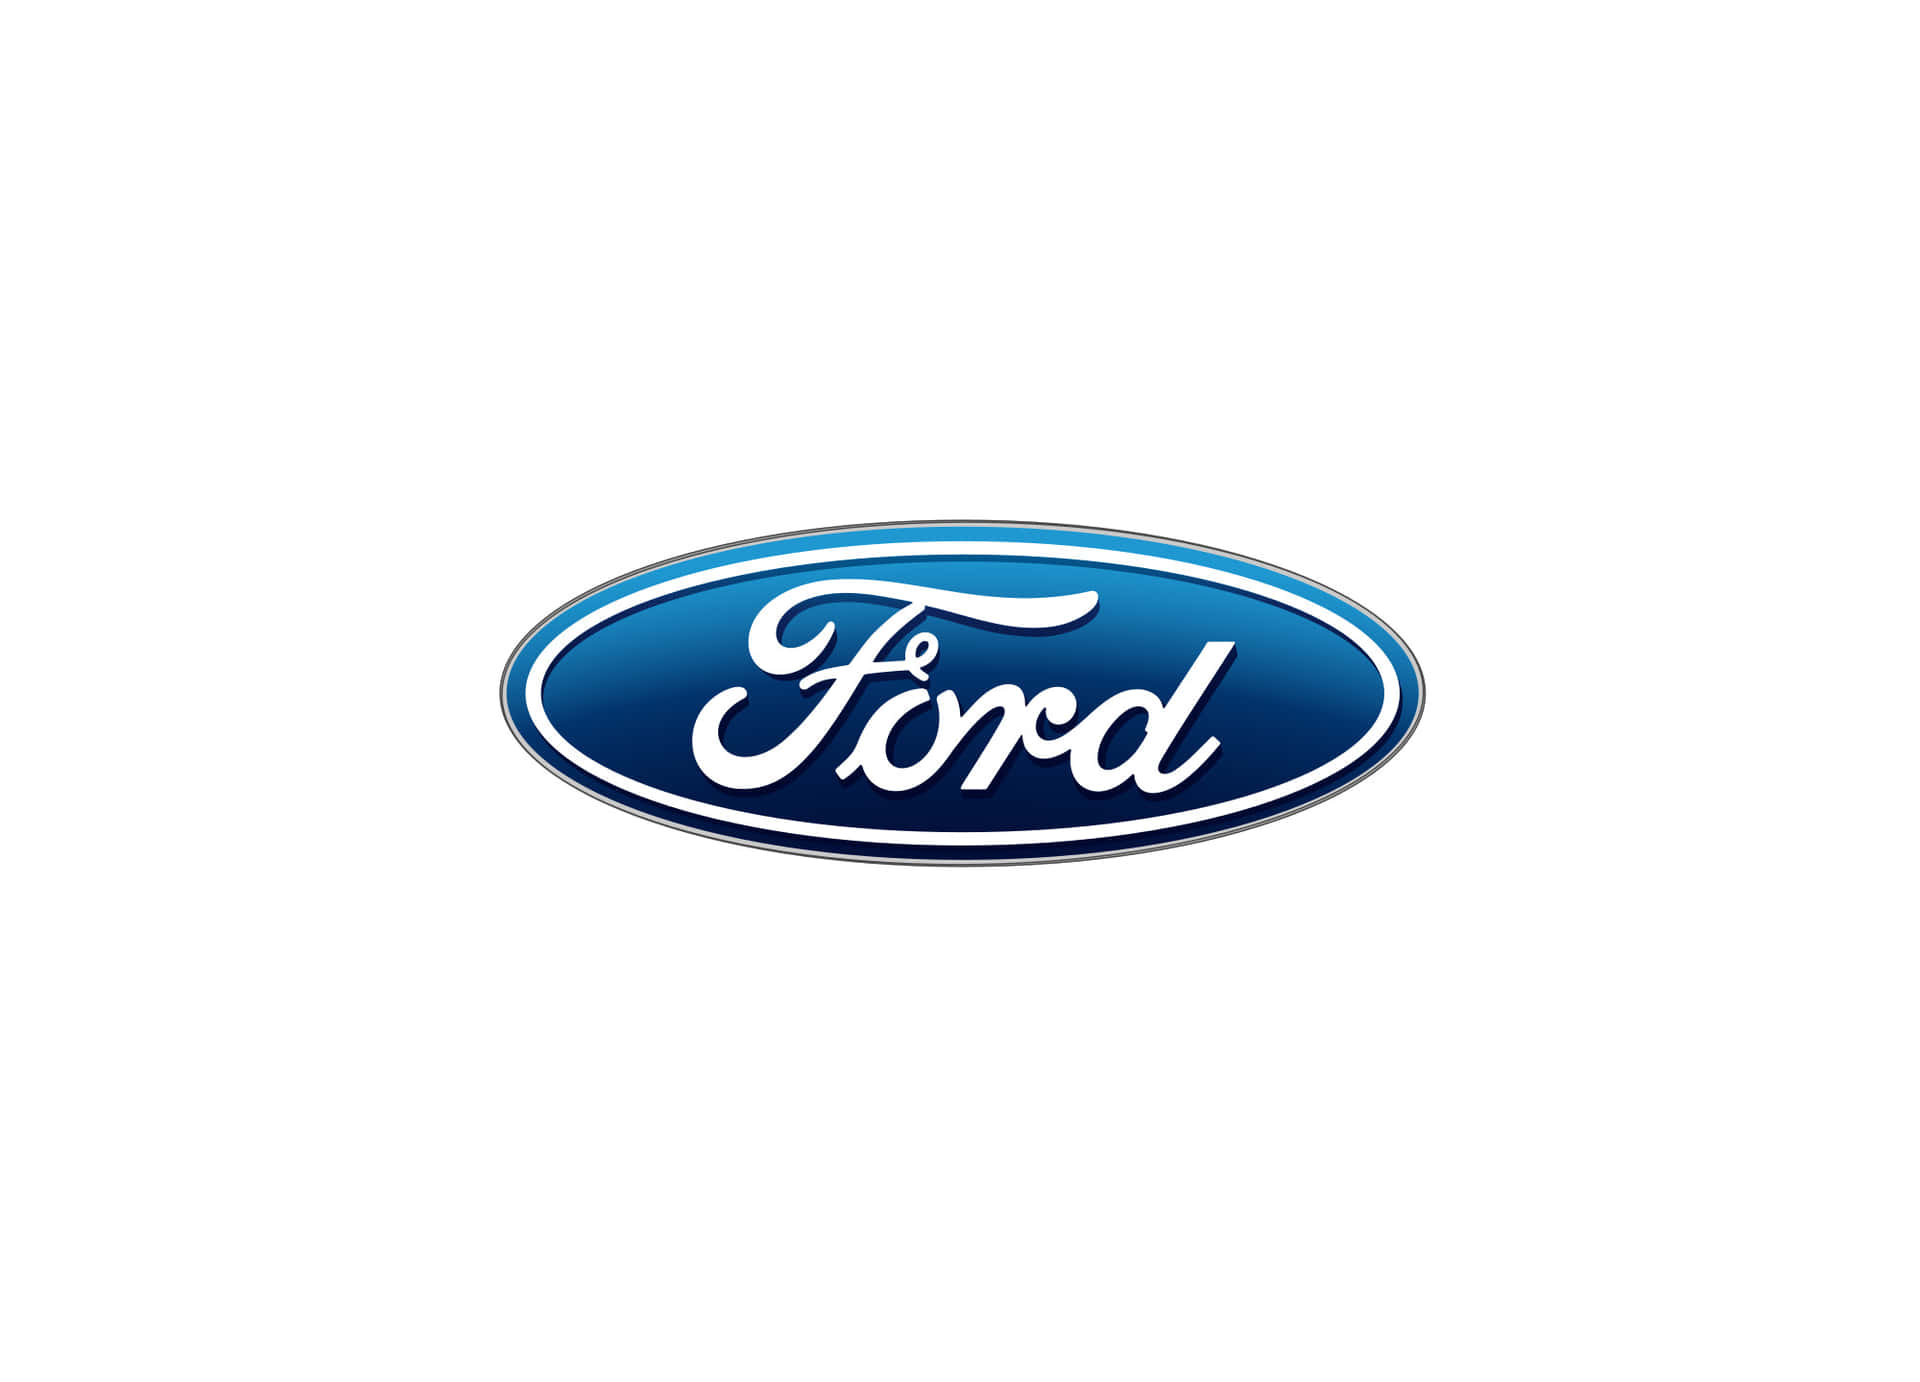 Take Every Adventure in Your Ford